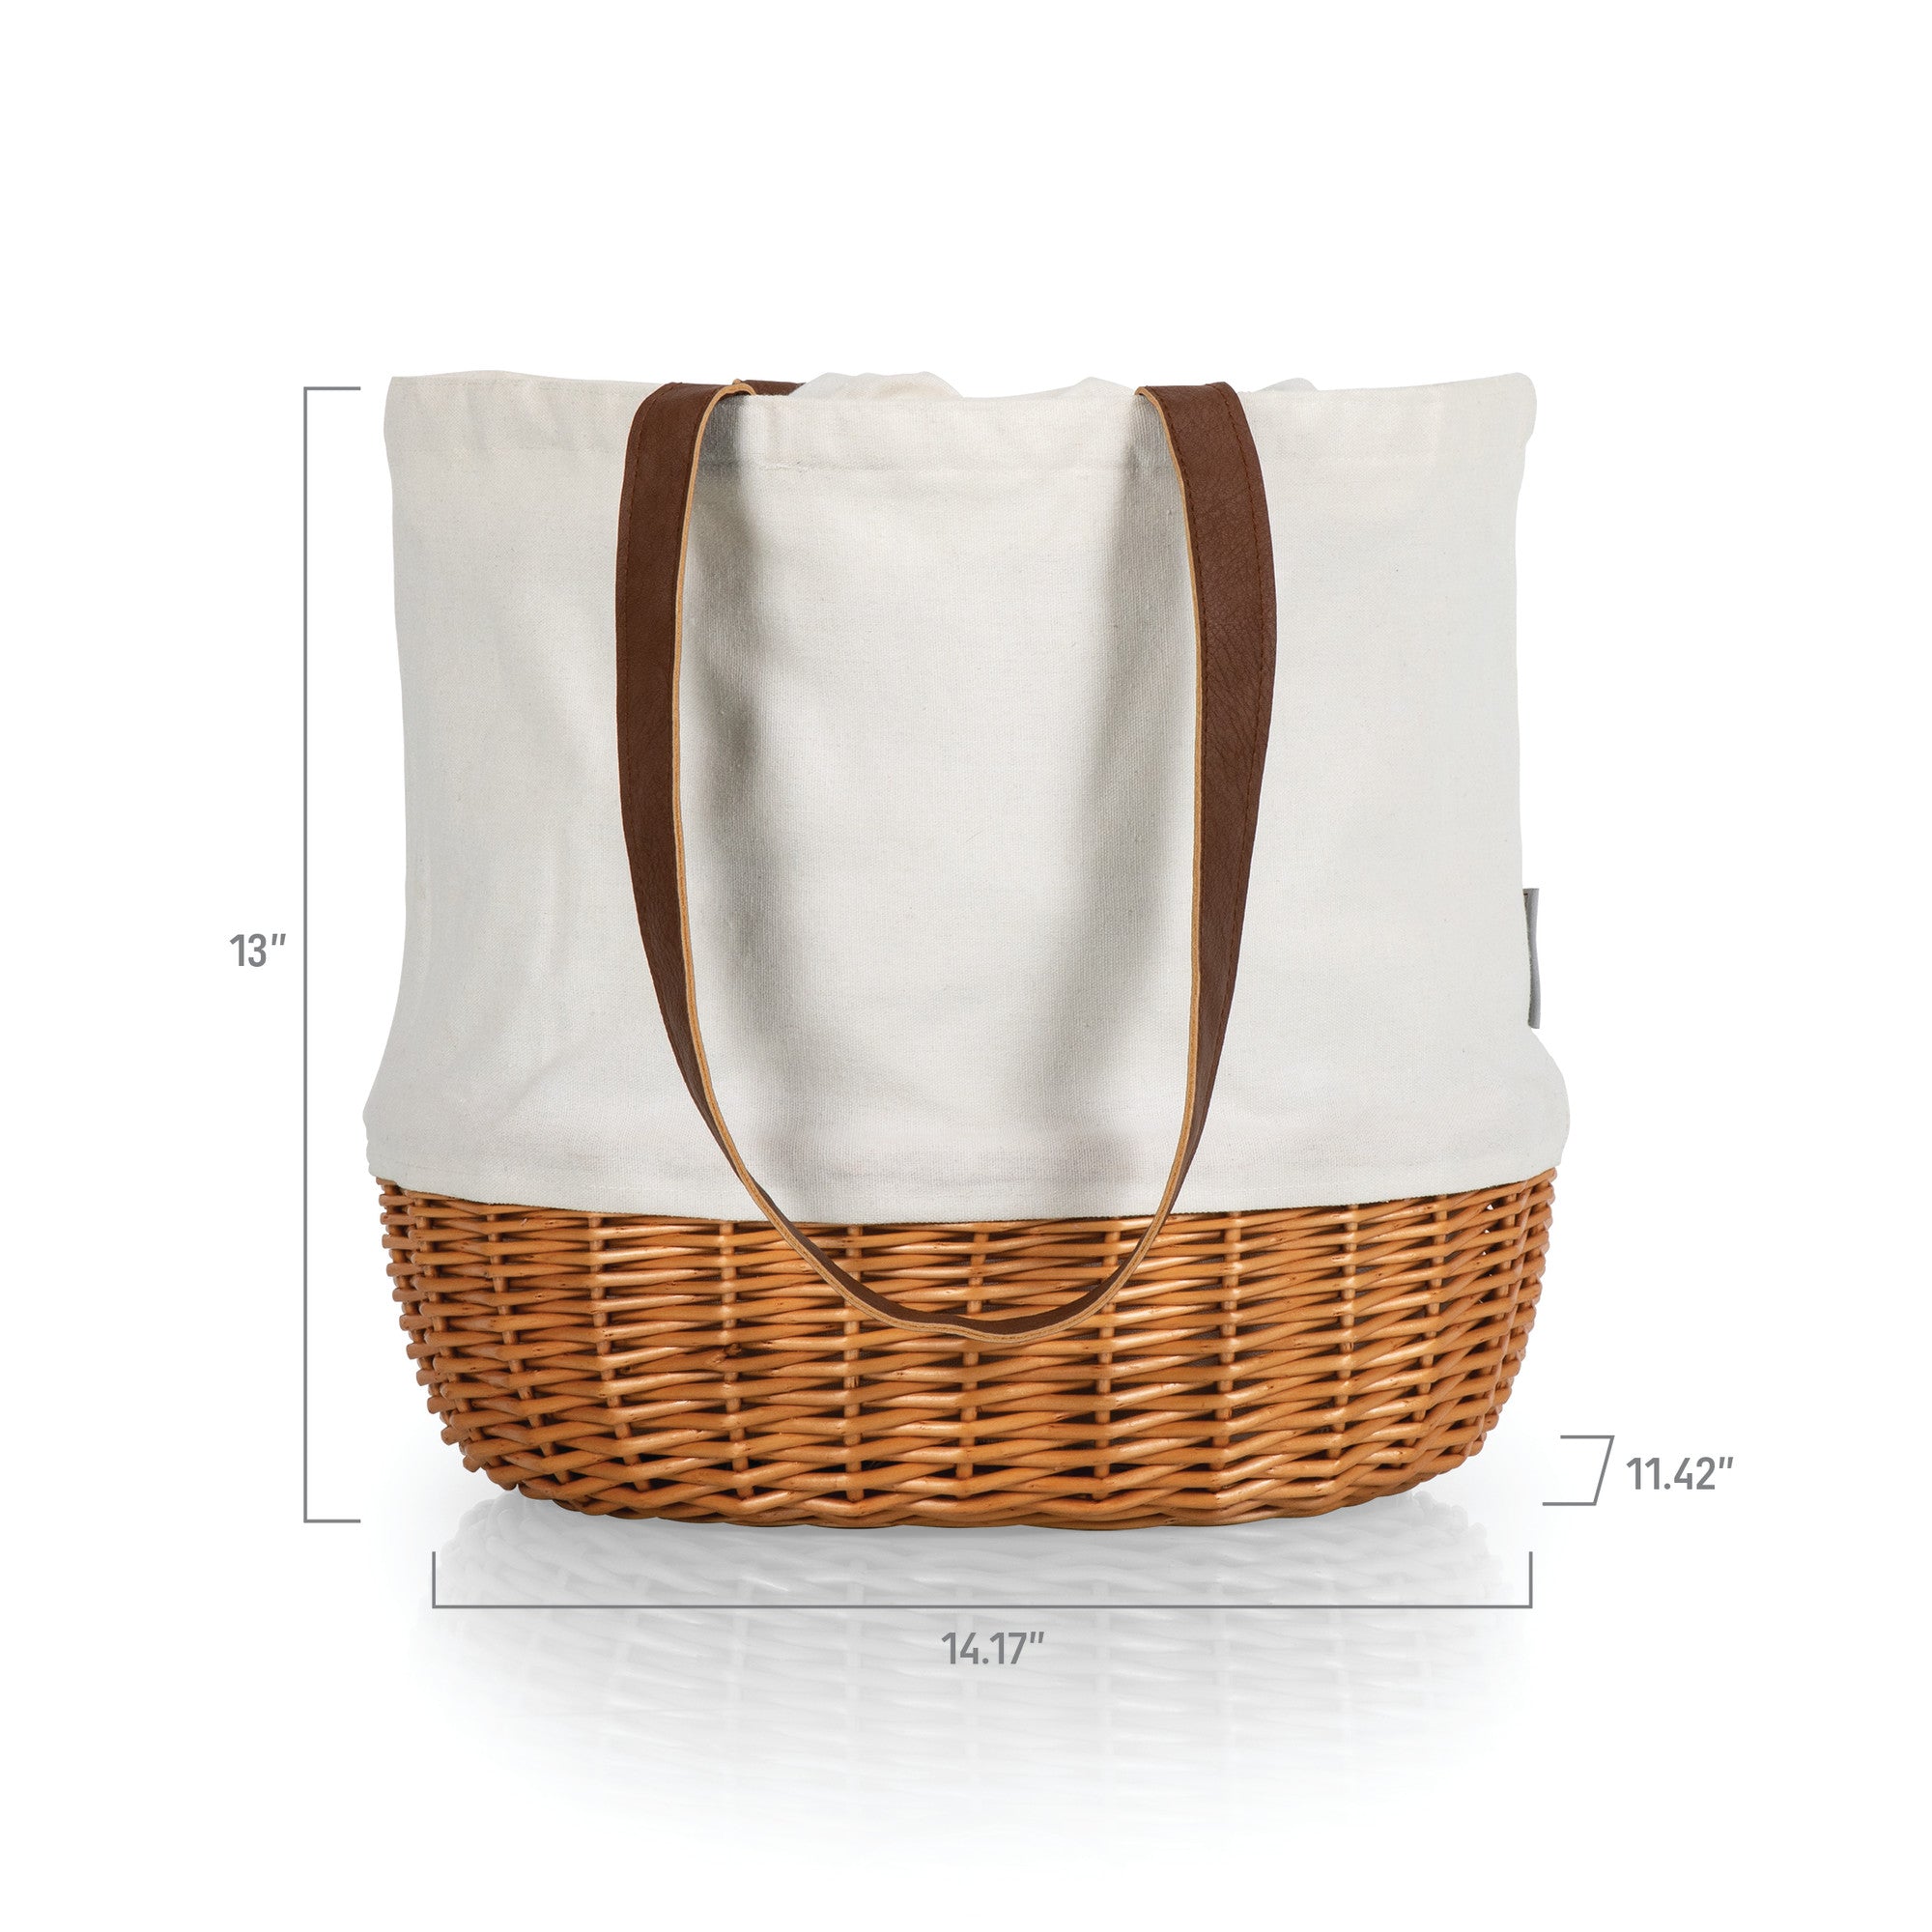 UP - Coronado Canvas and Willow Basket Tote